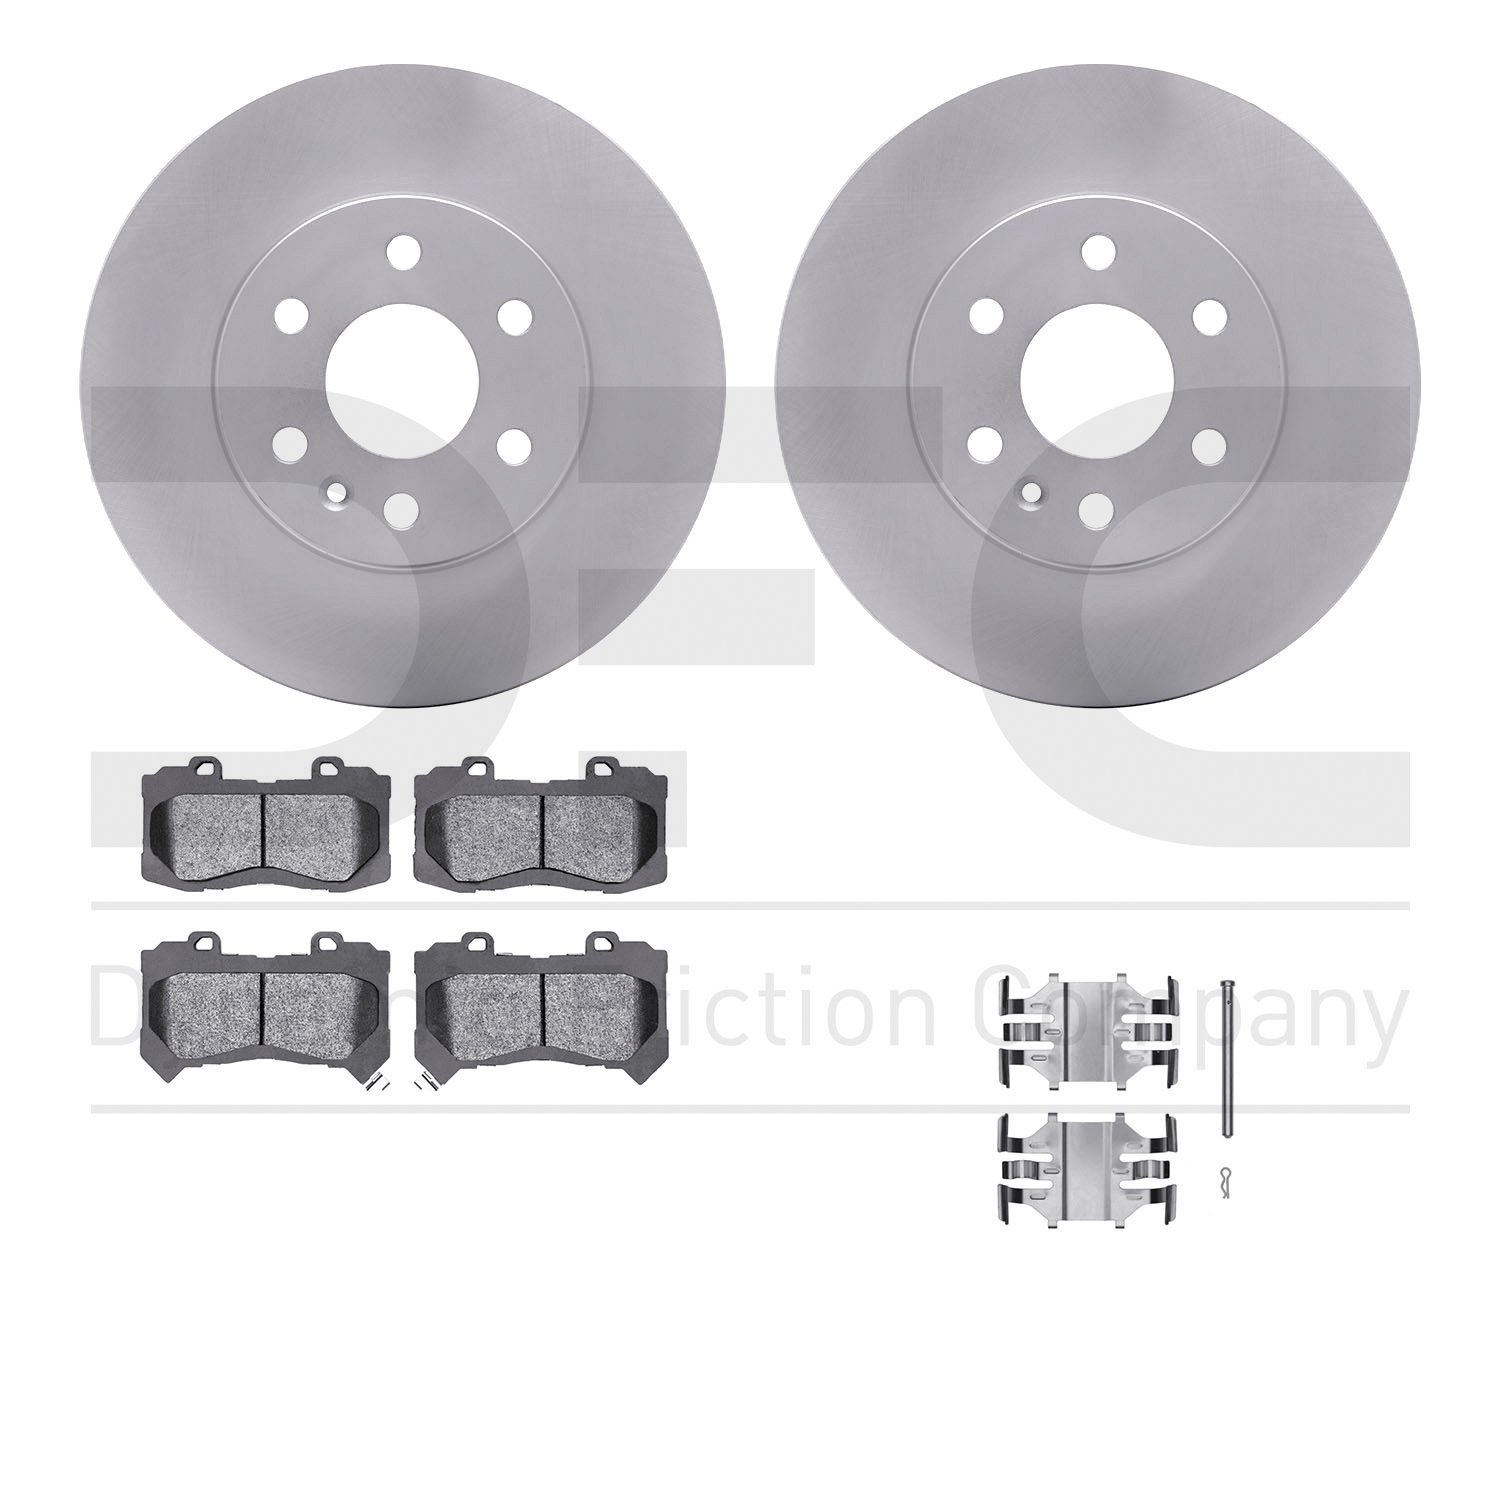 4412-48034 Geospec Brake Rotors with Ultimate-Duty Brake Pads & Hardware, 2015-2020 GM, Position: Front